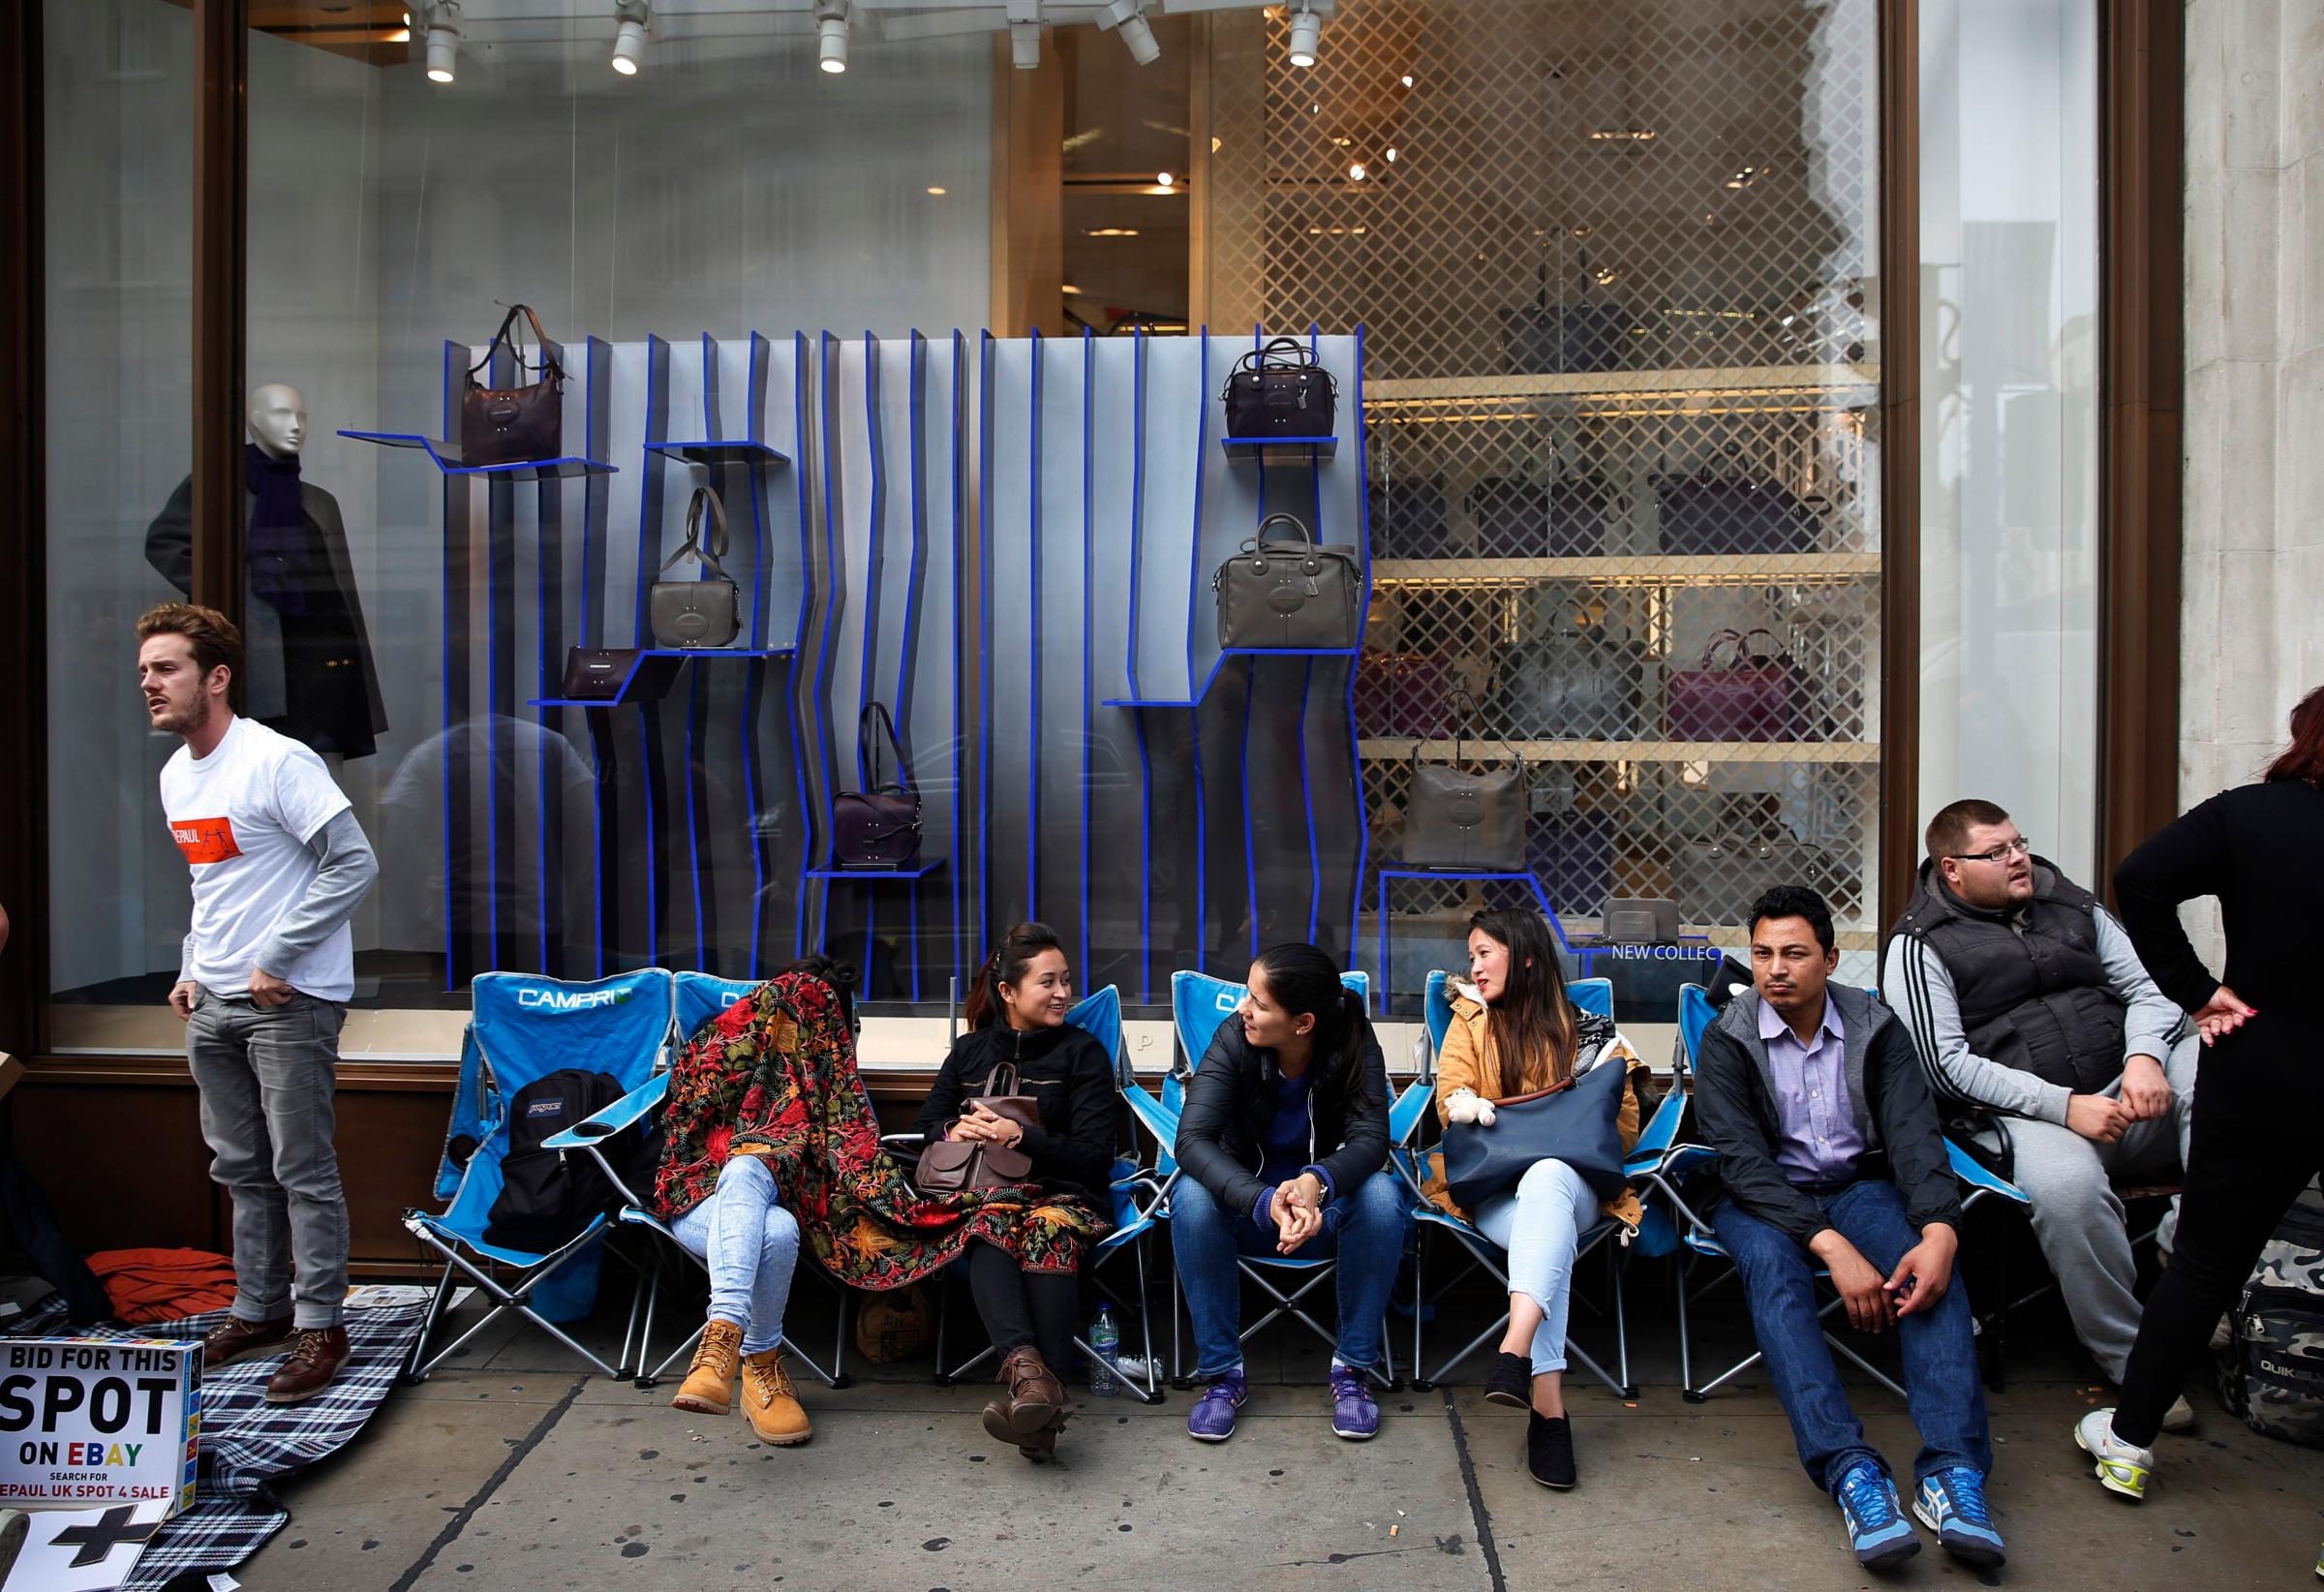 People pass time as they wait outside an Apple store for the iPhone 6 and 6 Plus in London on Sept. 17, 2014.